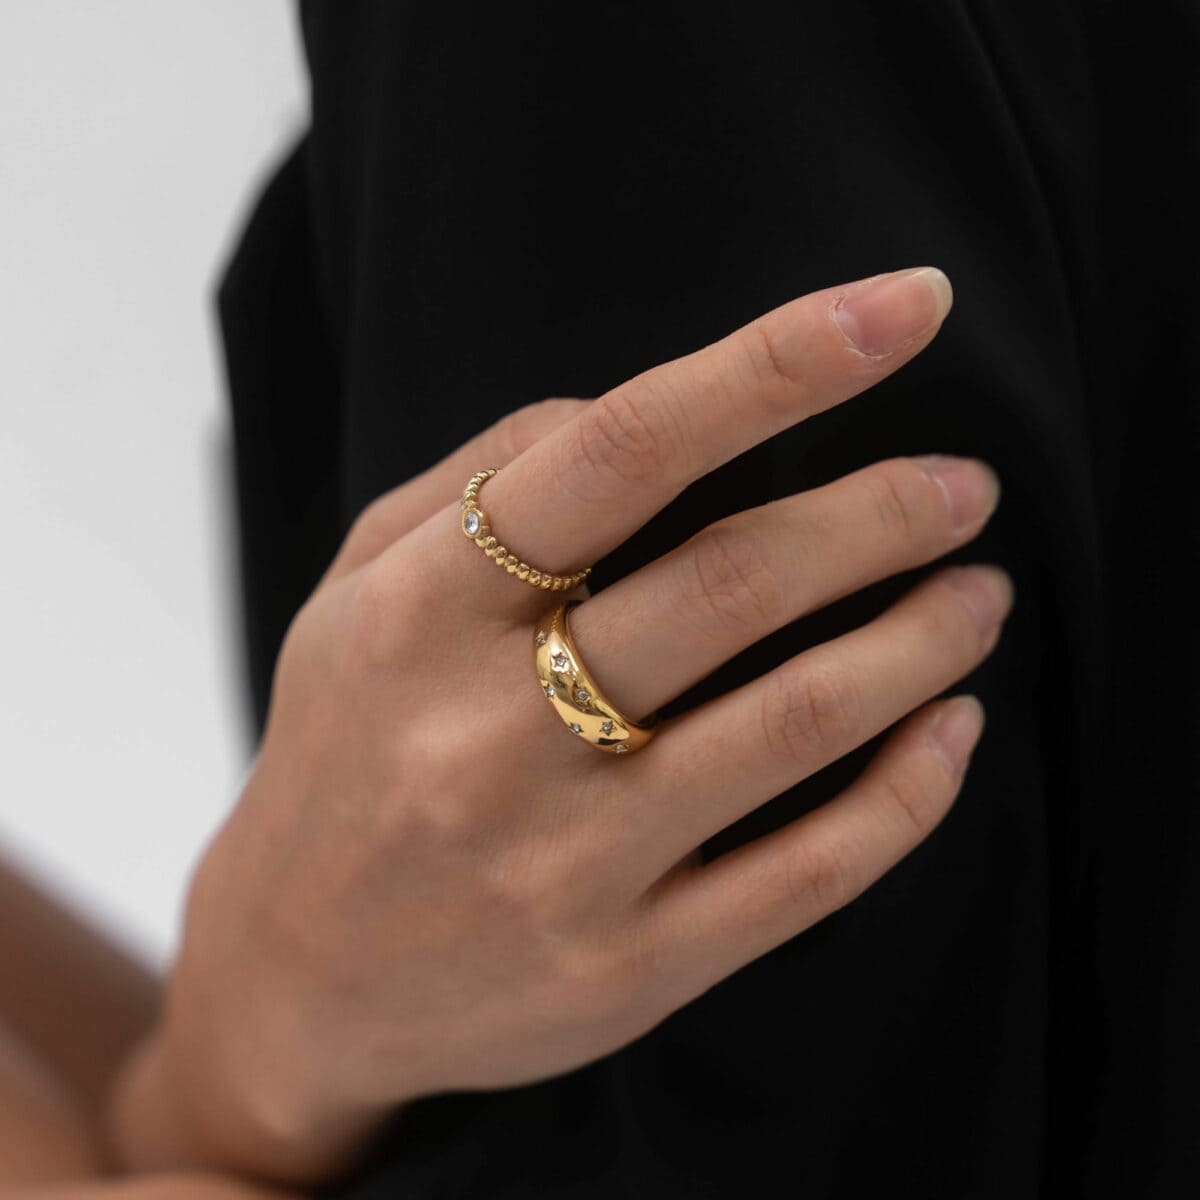 https://m.clubbella.co/product/gold-solitaire-wavy-ring/ DSC00084